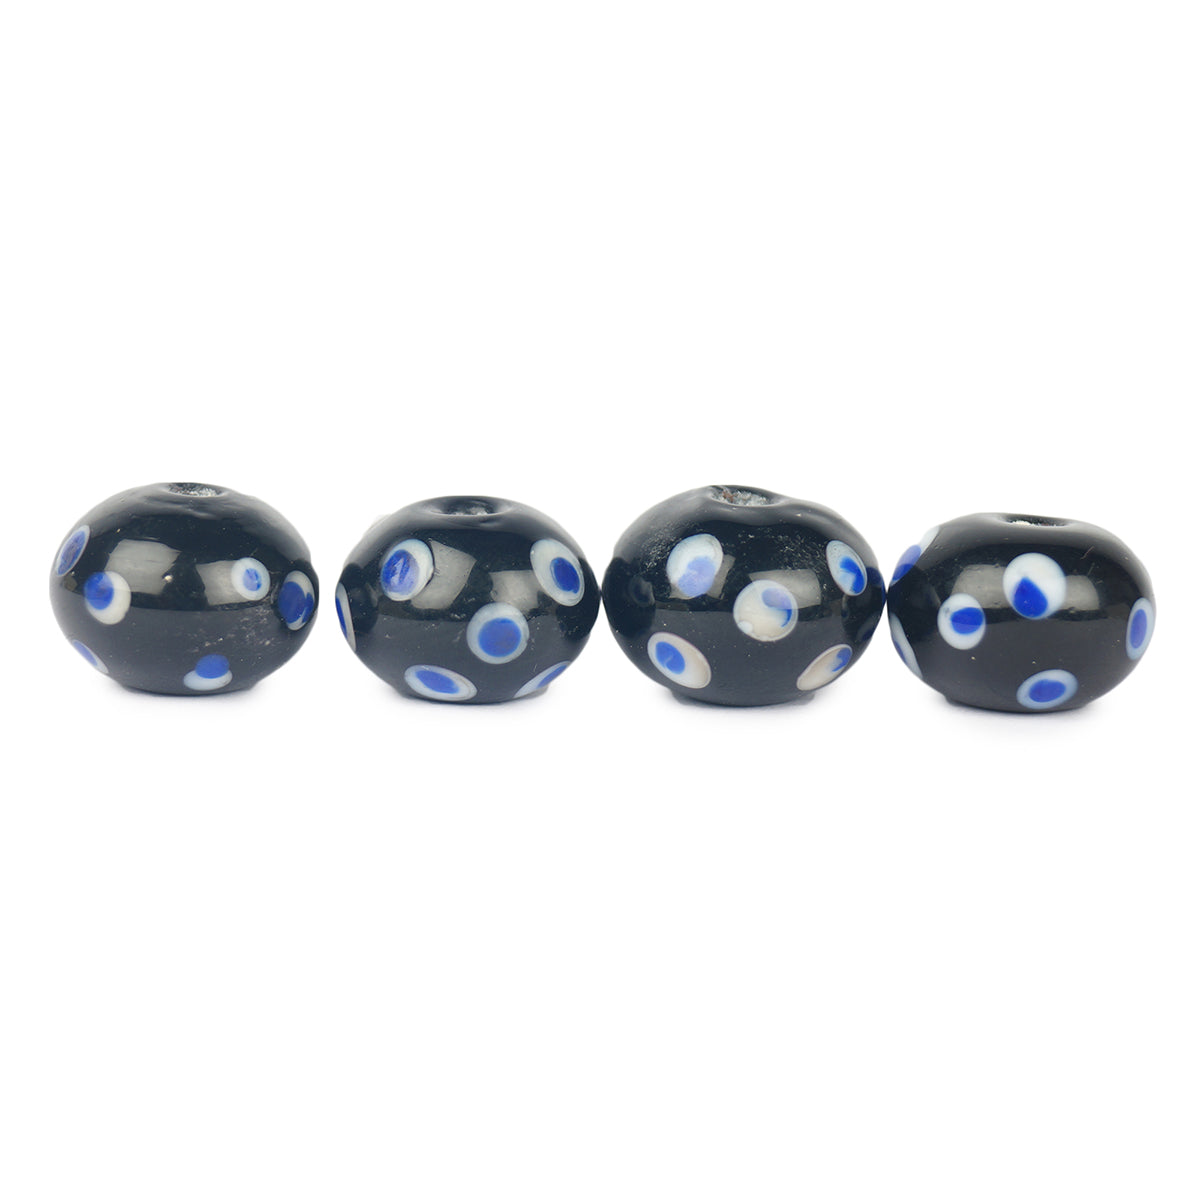 Blue glass bead with eye decoration